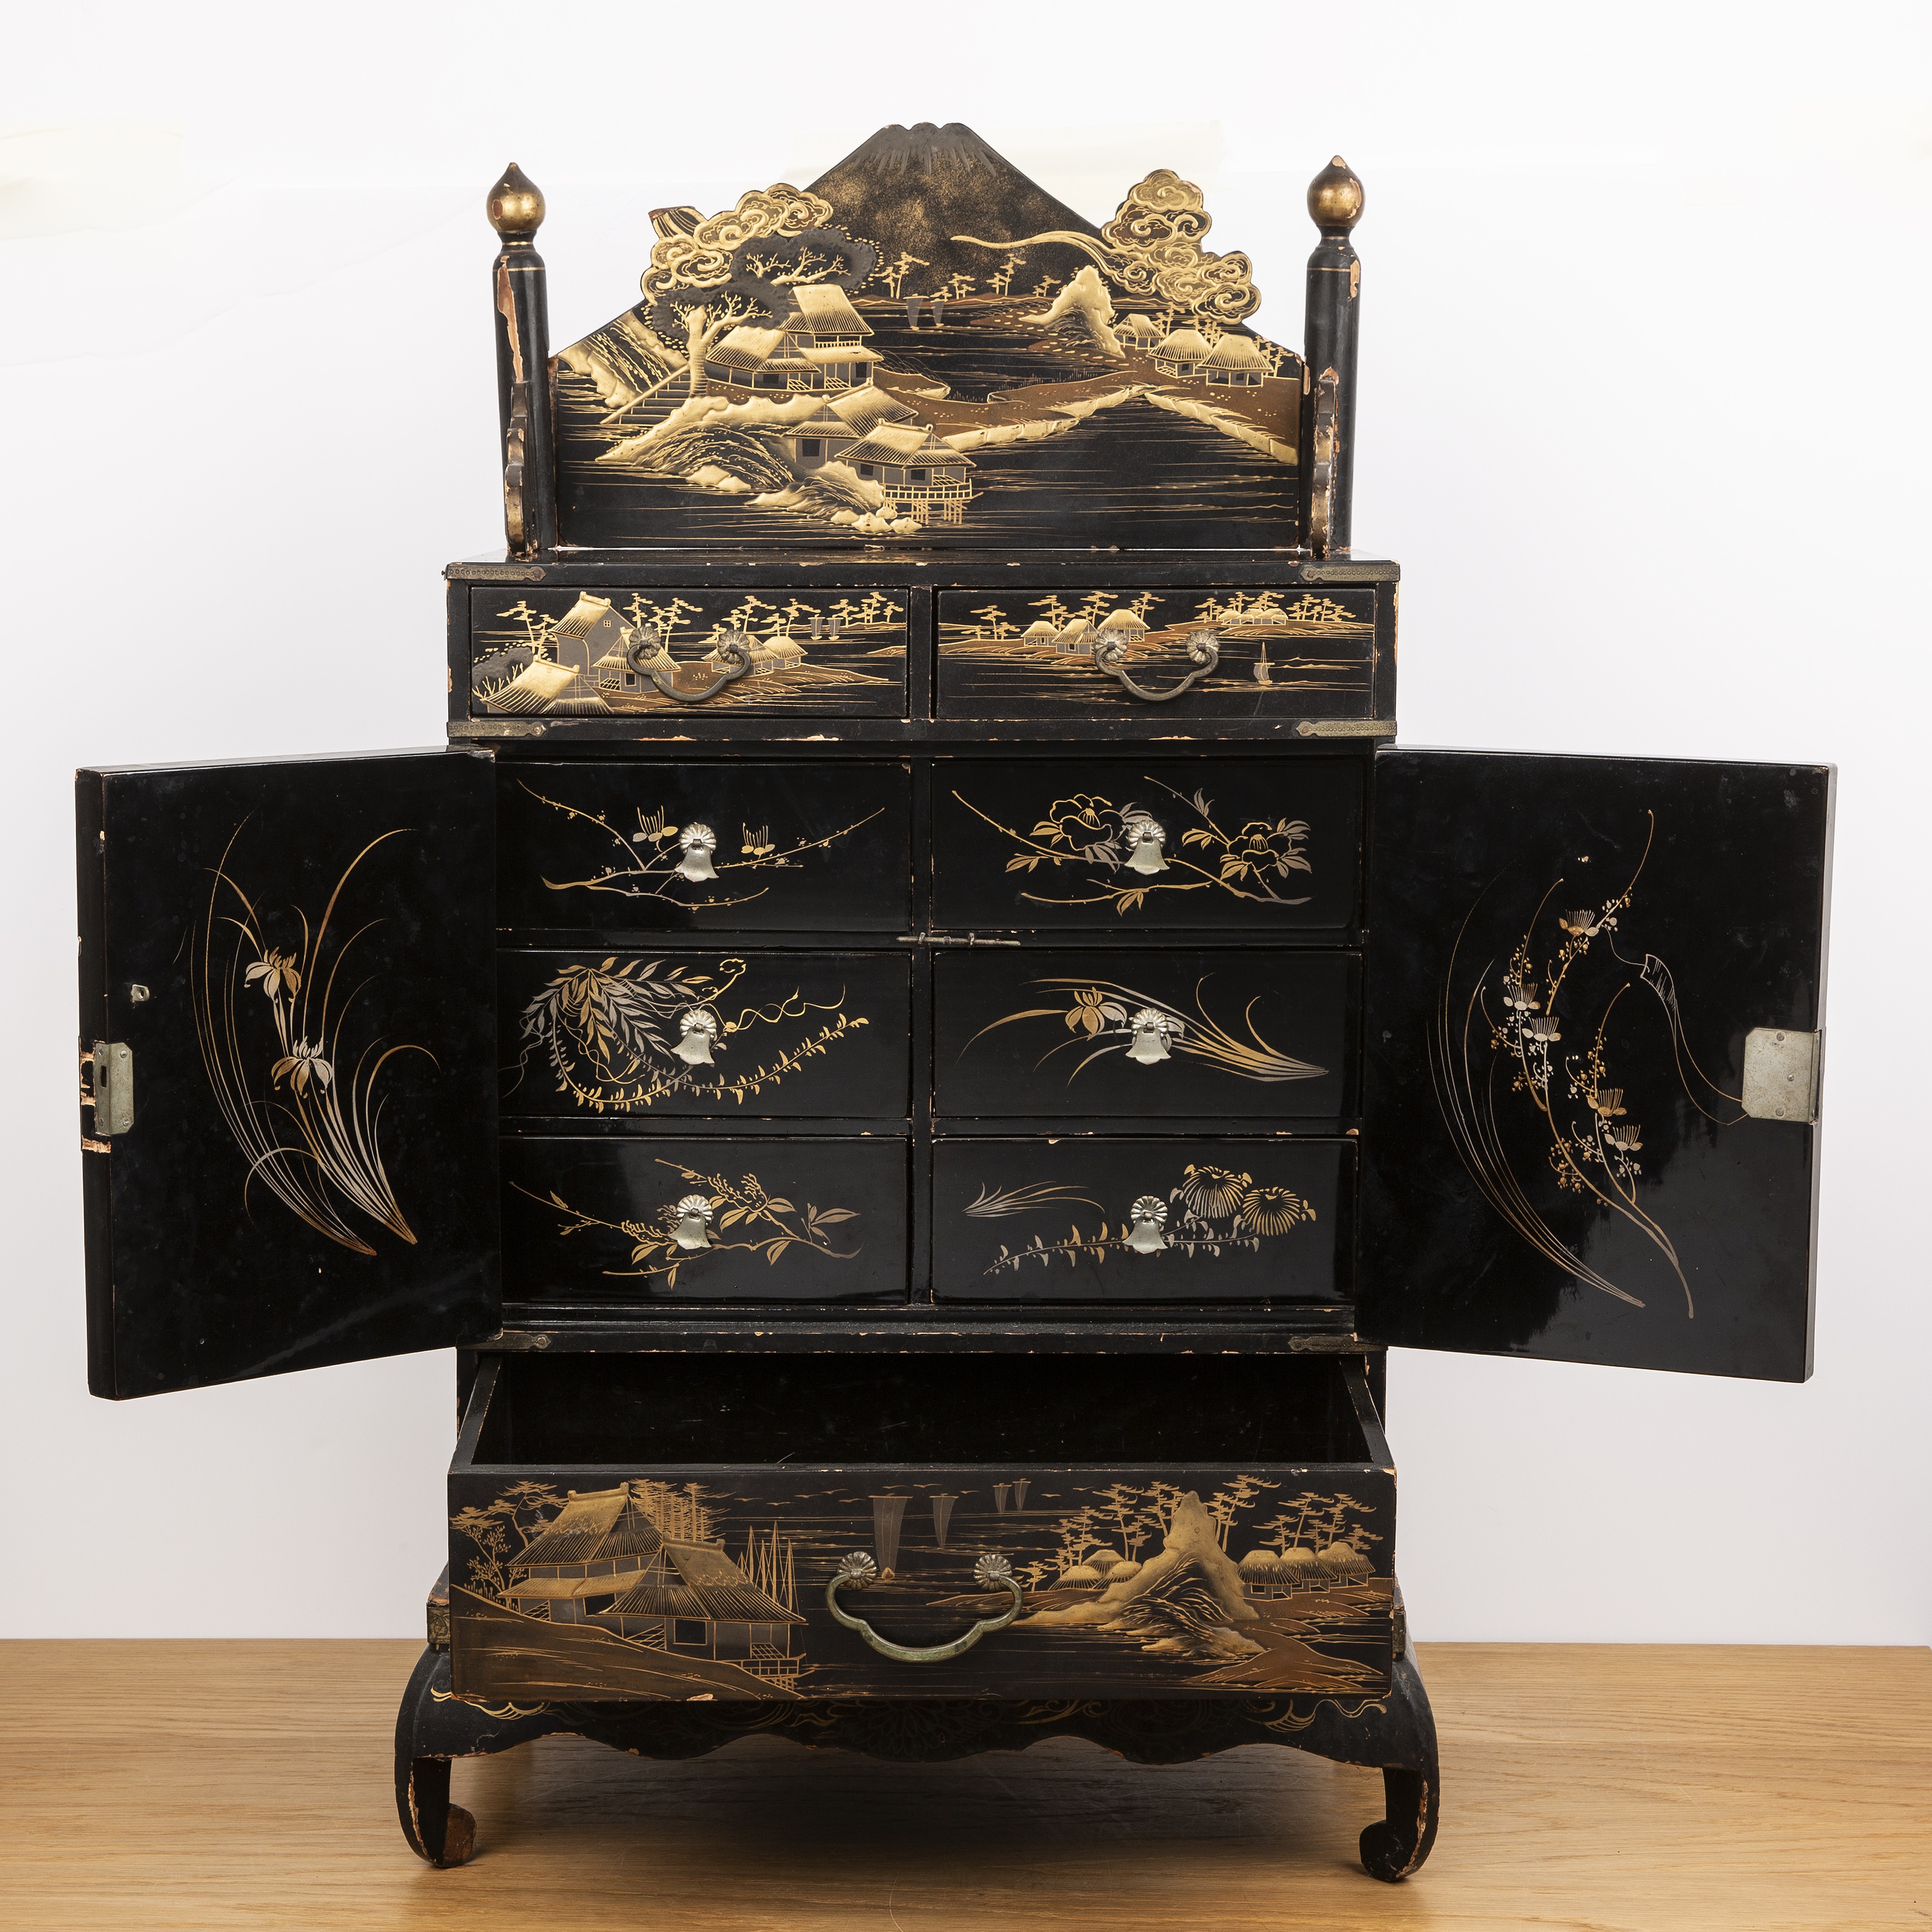 Black lacquer cabinet on stand Japanese the piece with two central doors, the doors opening to - Image 4 of 5